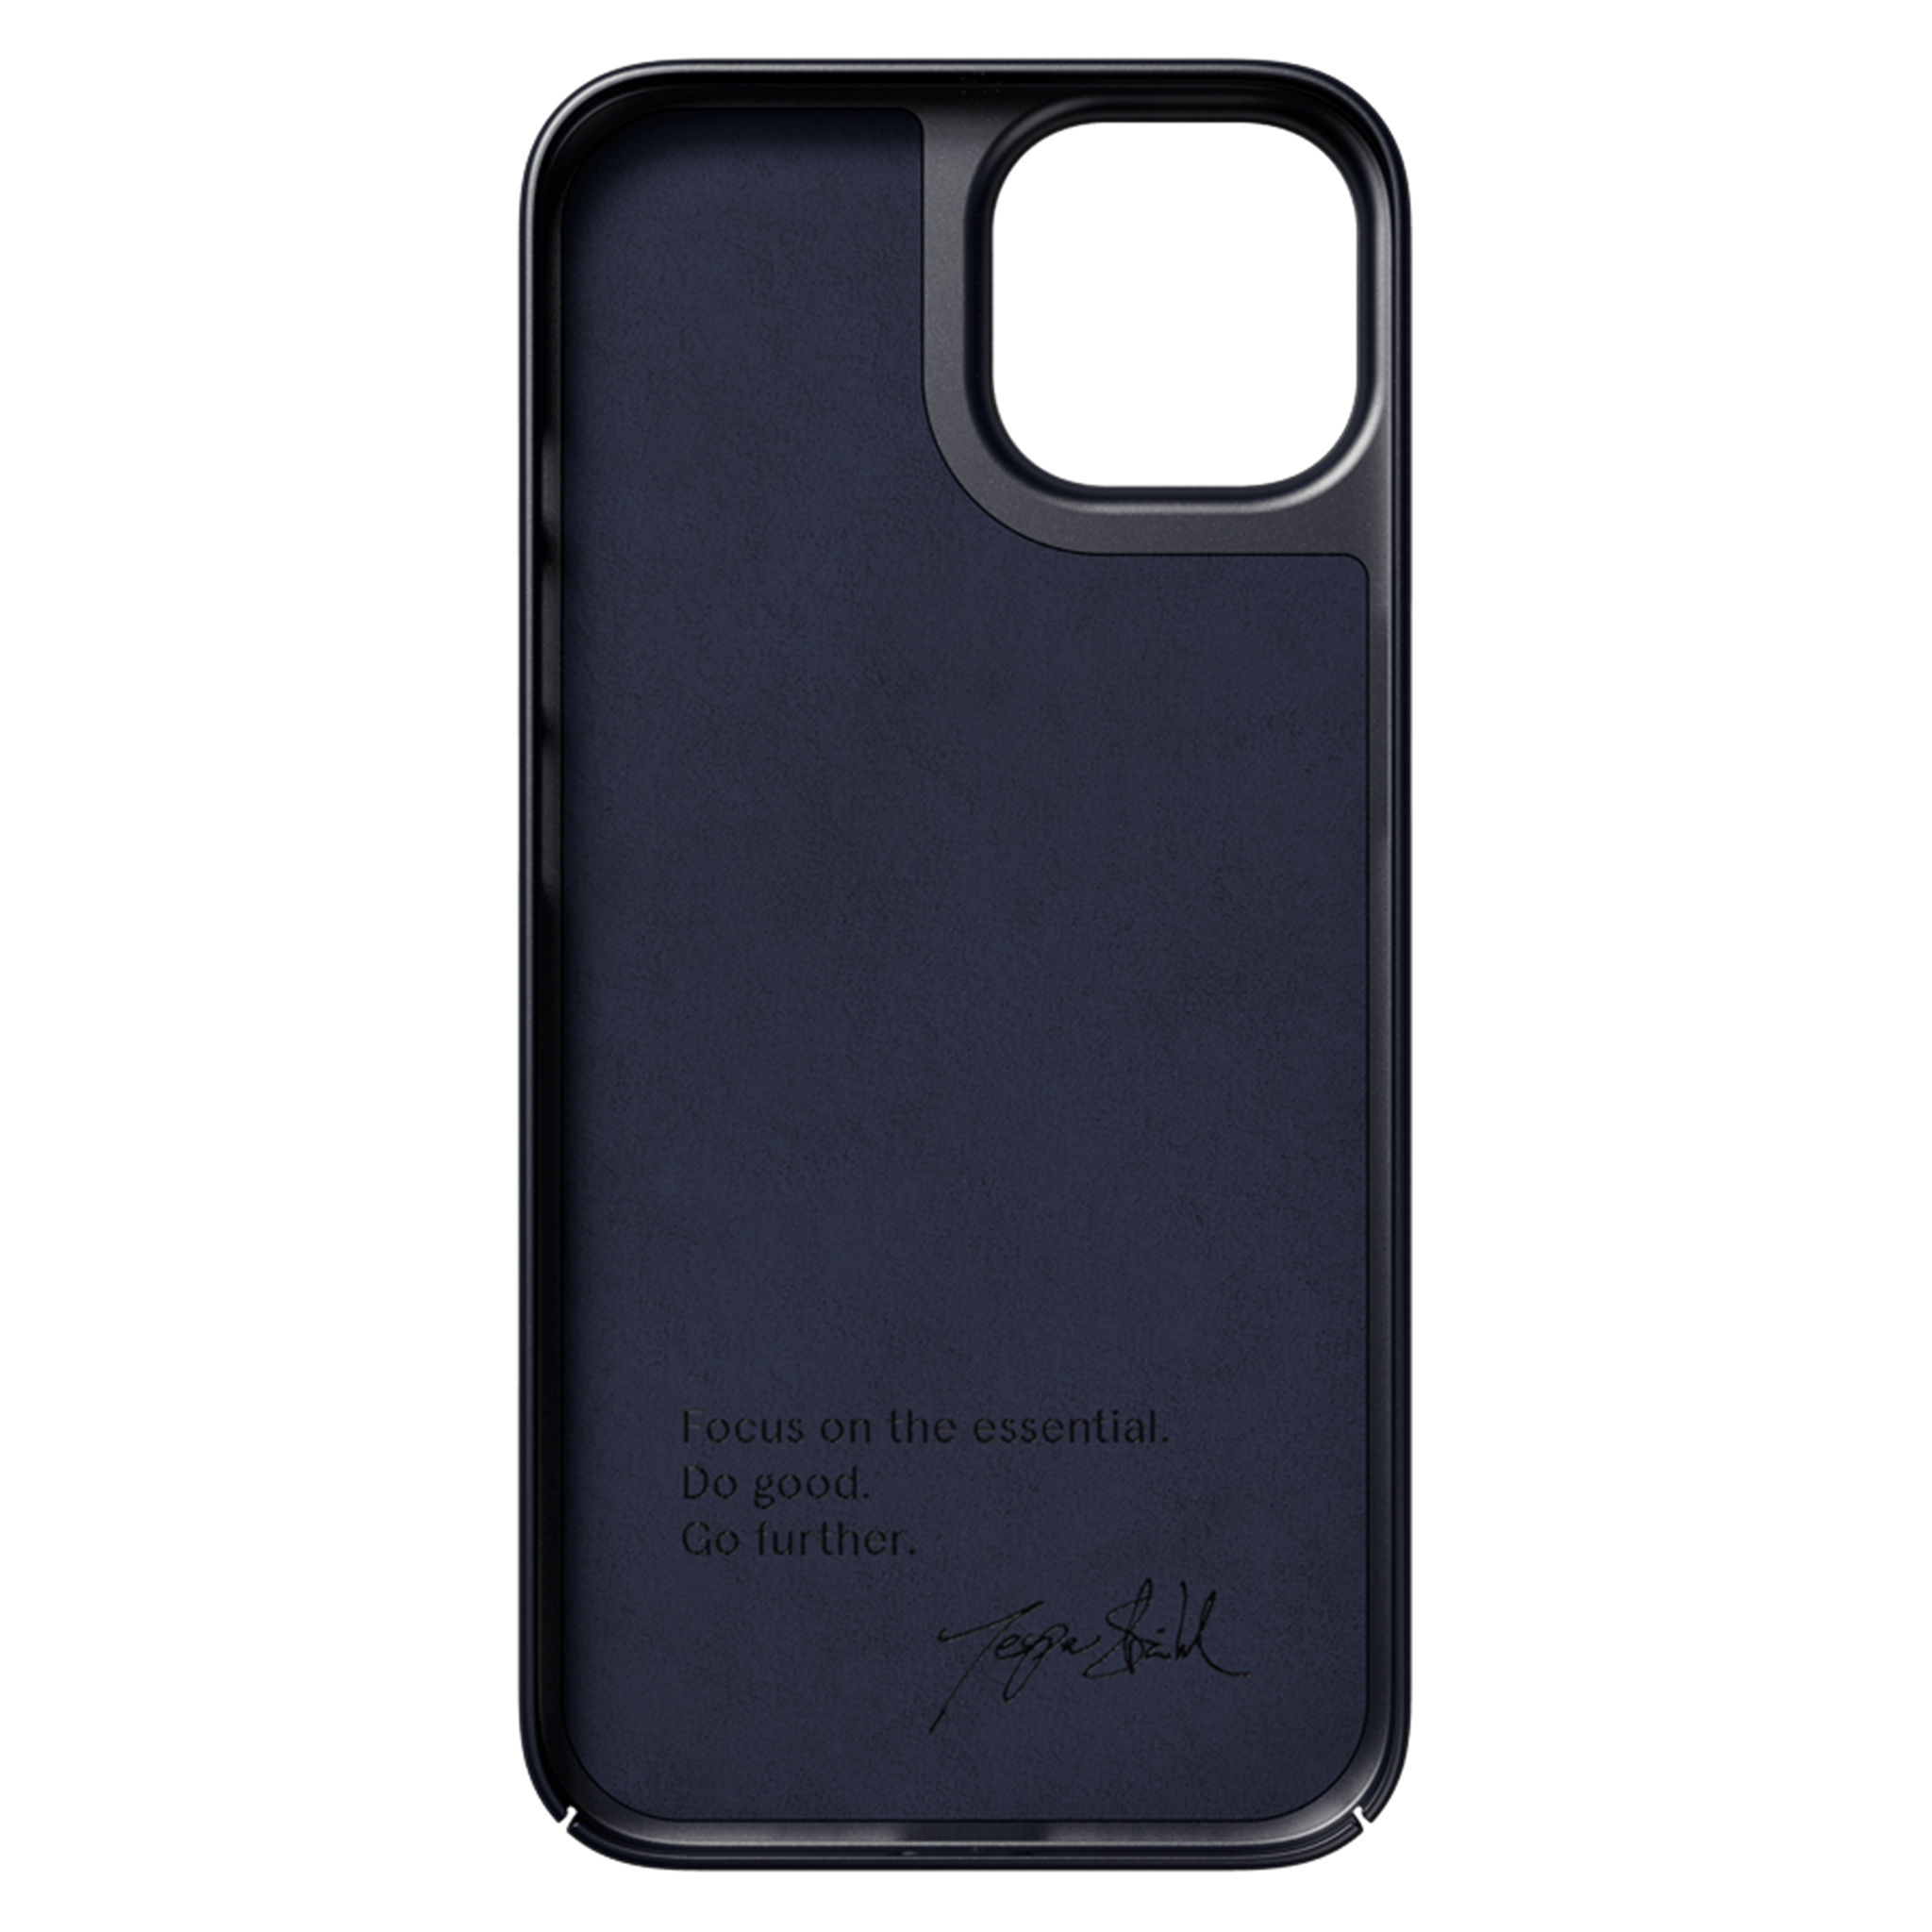 00-000-0054-0001_Nudient-iPhone-14-Pro-Max-Thin-Cover-Midwinter-Blue_02.png